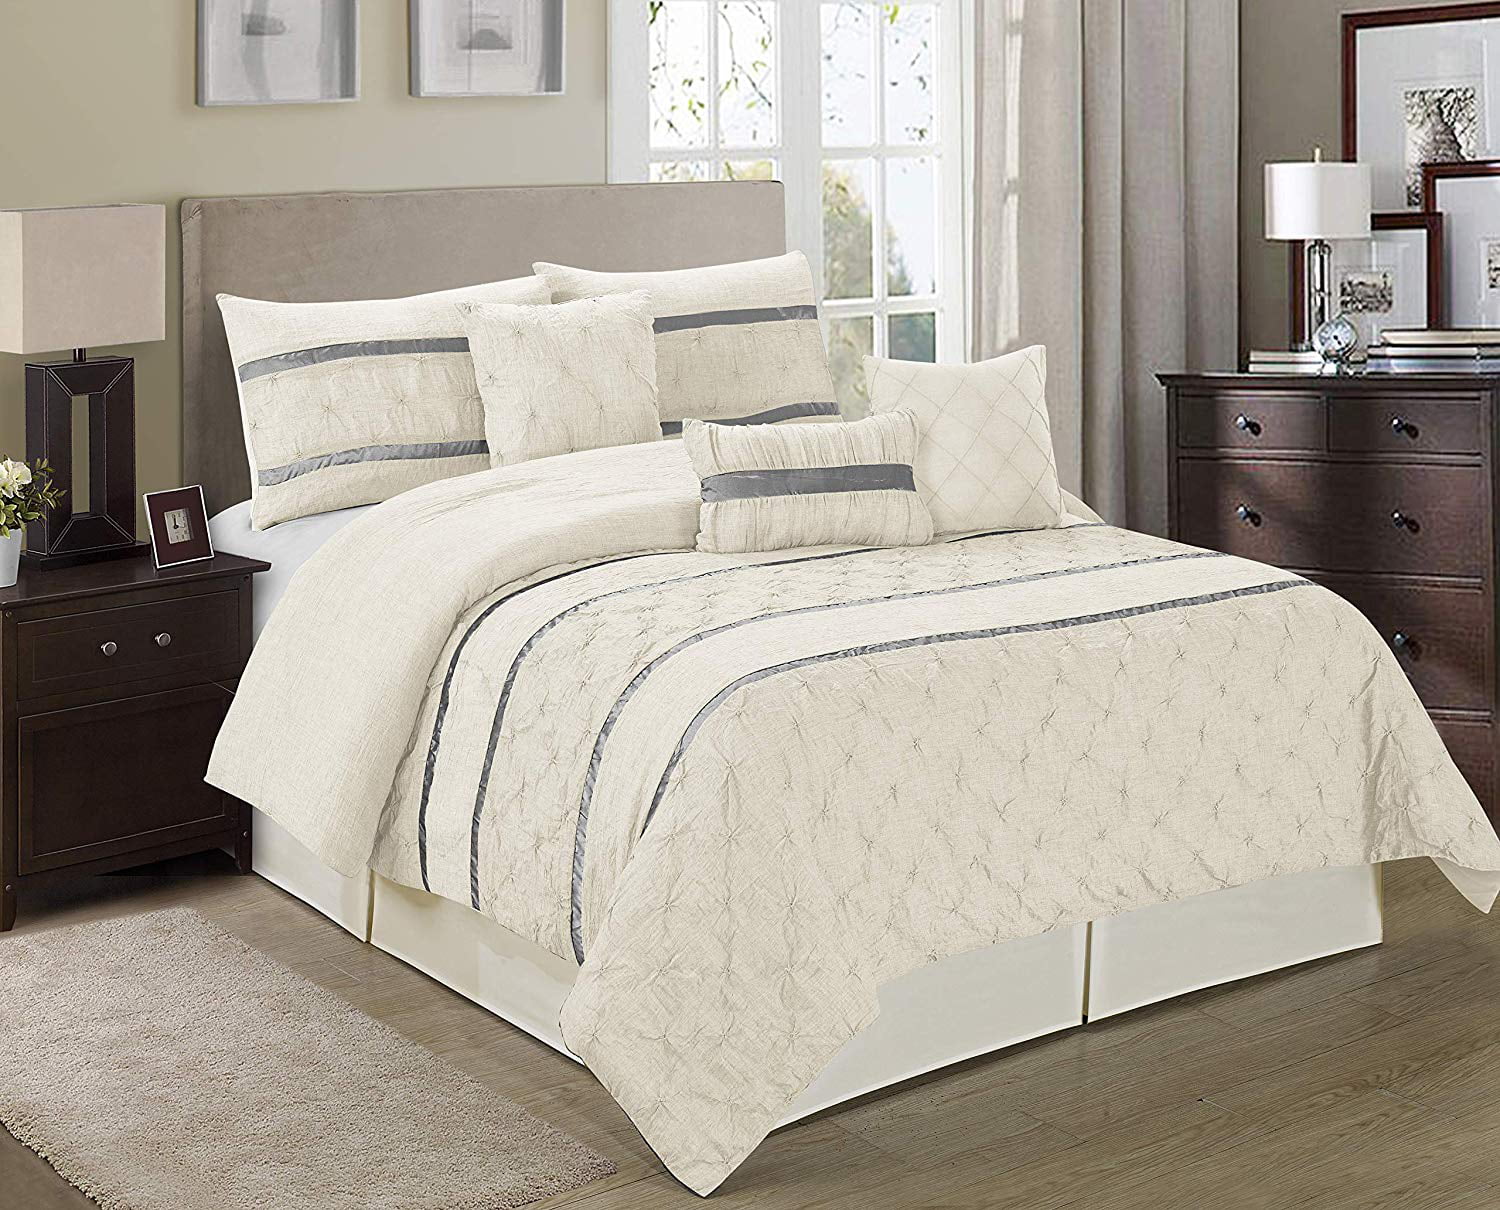 Unique Home Gloria Comforter 7 Piece Bed in a Bag Ruffled Clearance Bedding Set Fade Resistant ...